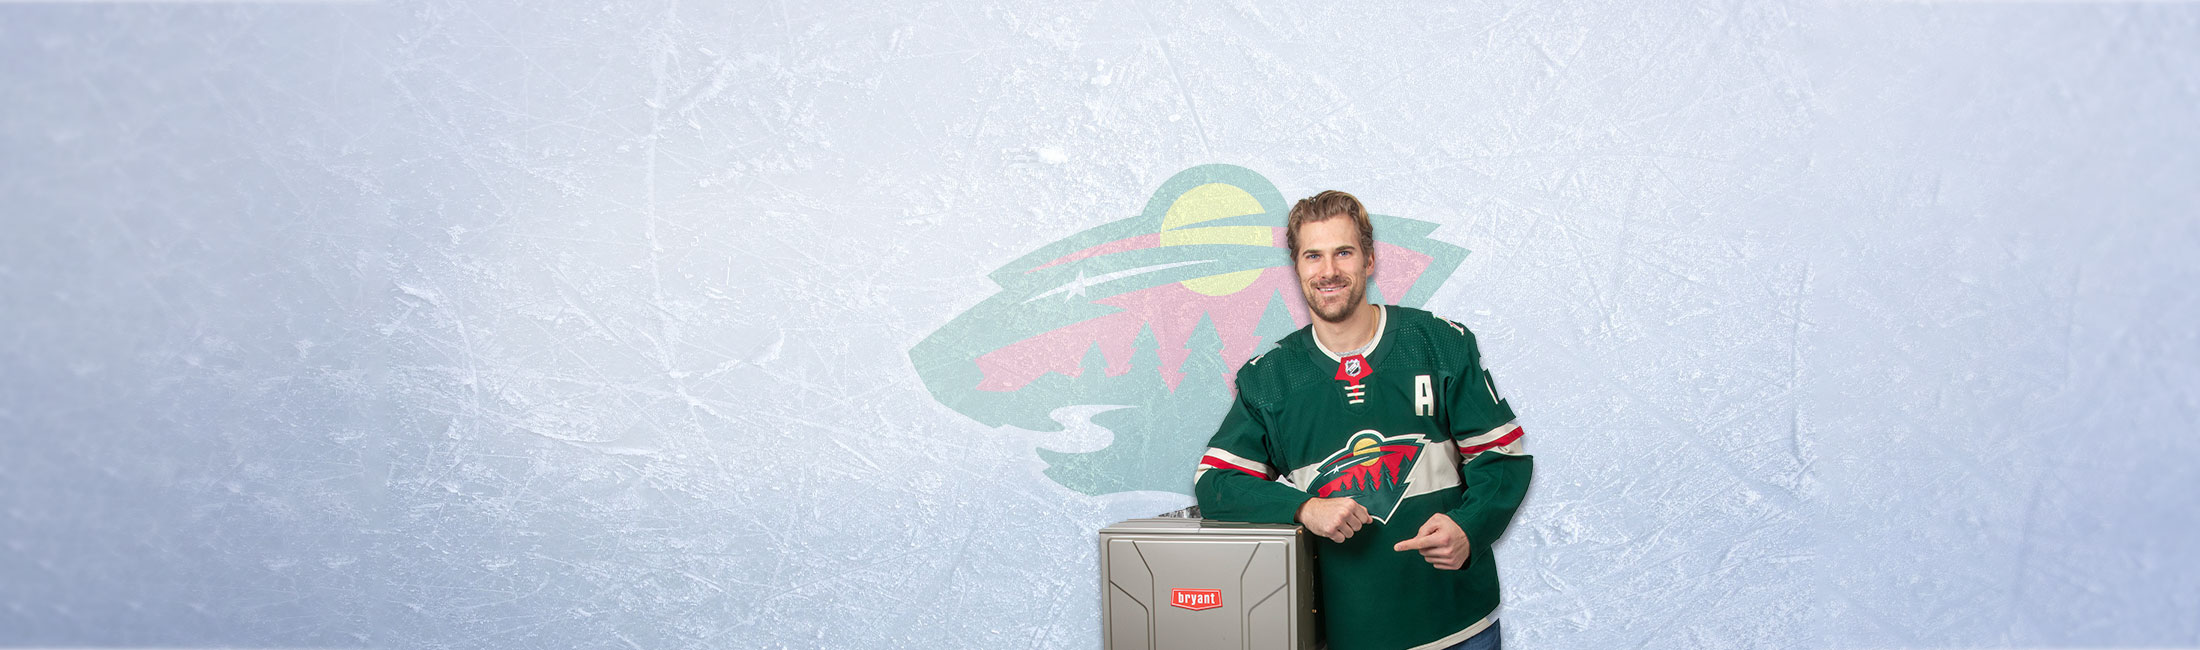 Marcus Foligno of the Minnesota Wild is the official Spokesperson of Bryant Heating & Cooling